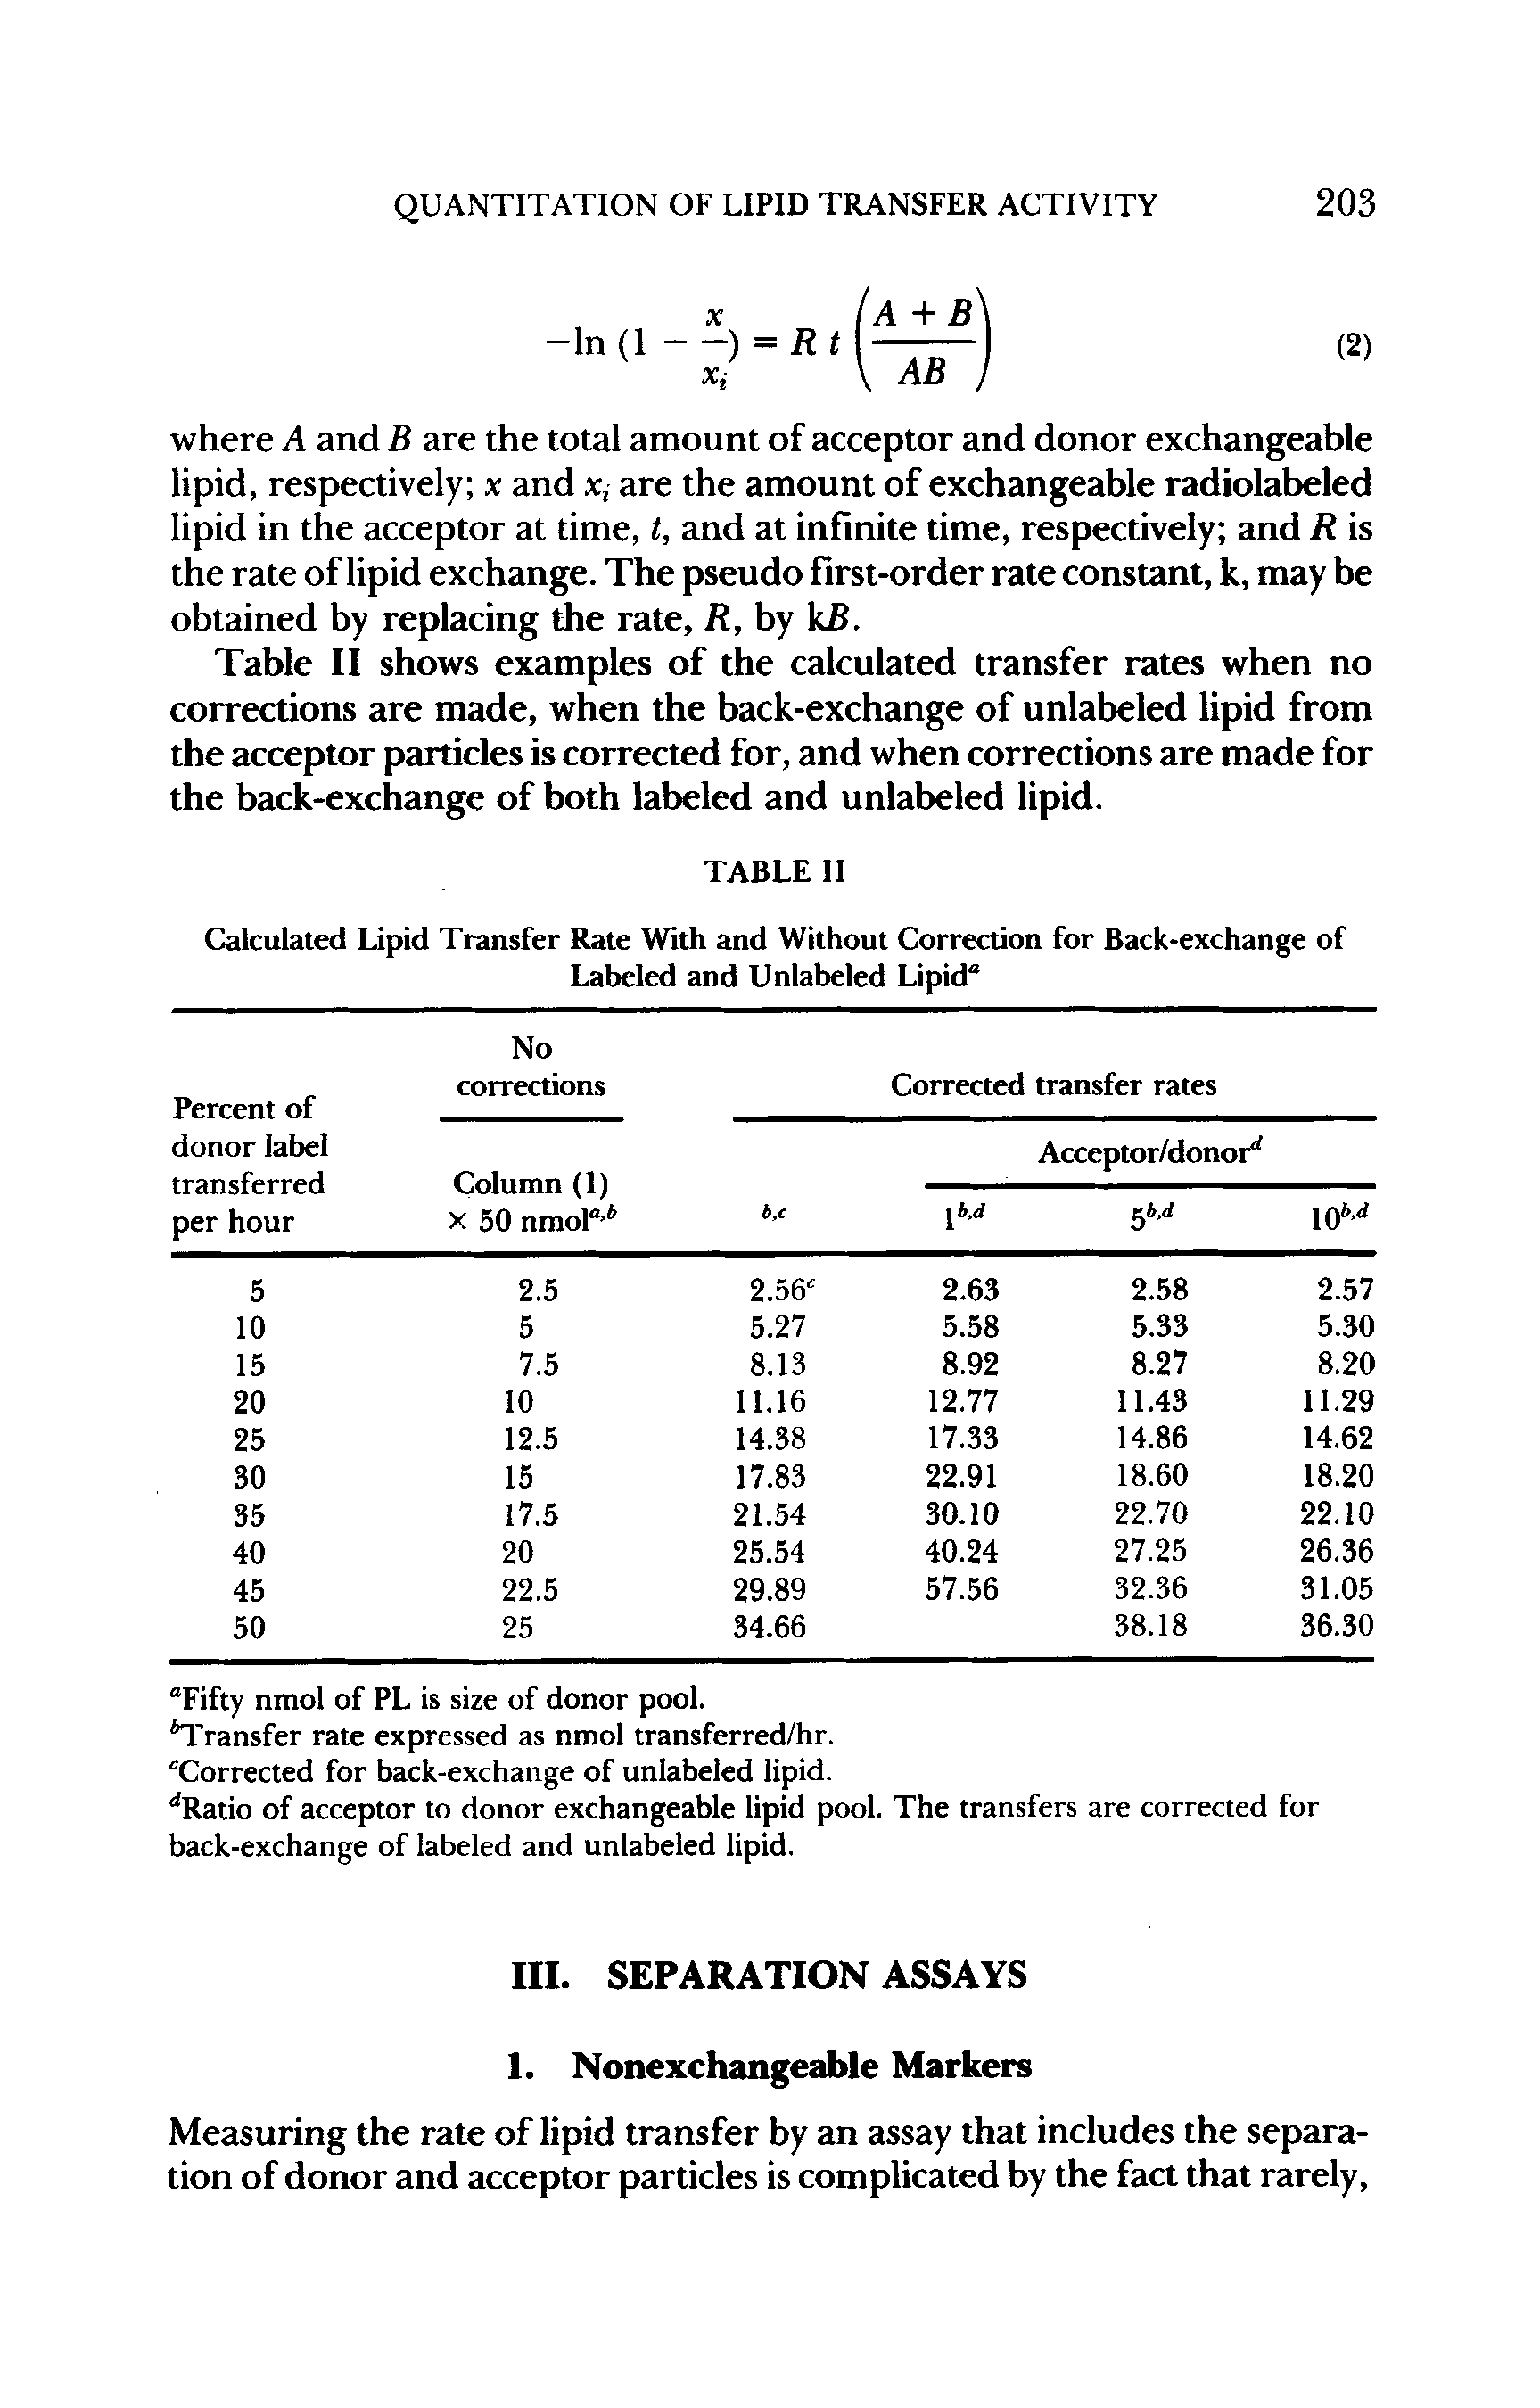 Table II shows examples of the calculated transfer rates when no corrections are made, when the back-exchange of unlabeled lipid from the acceptor particles is corrected for, and when corrections are made for the back-exchange of both labeled and unlabeled lipid.